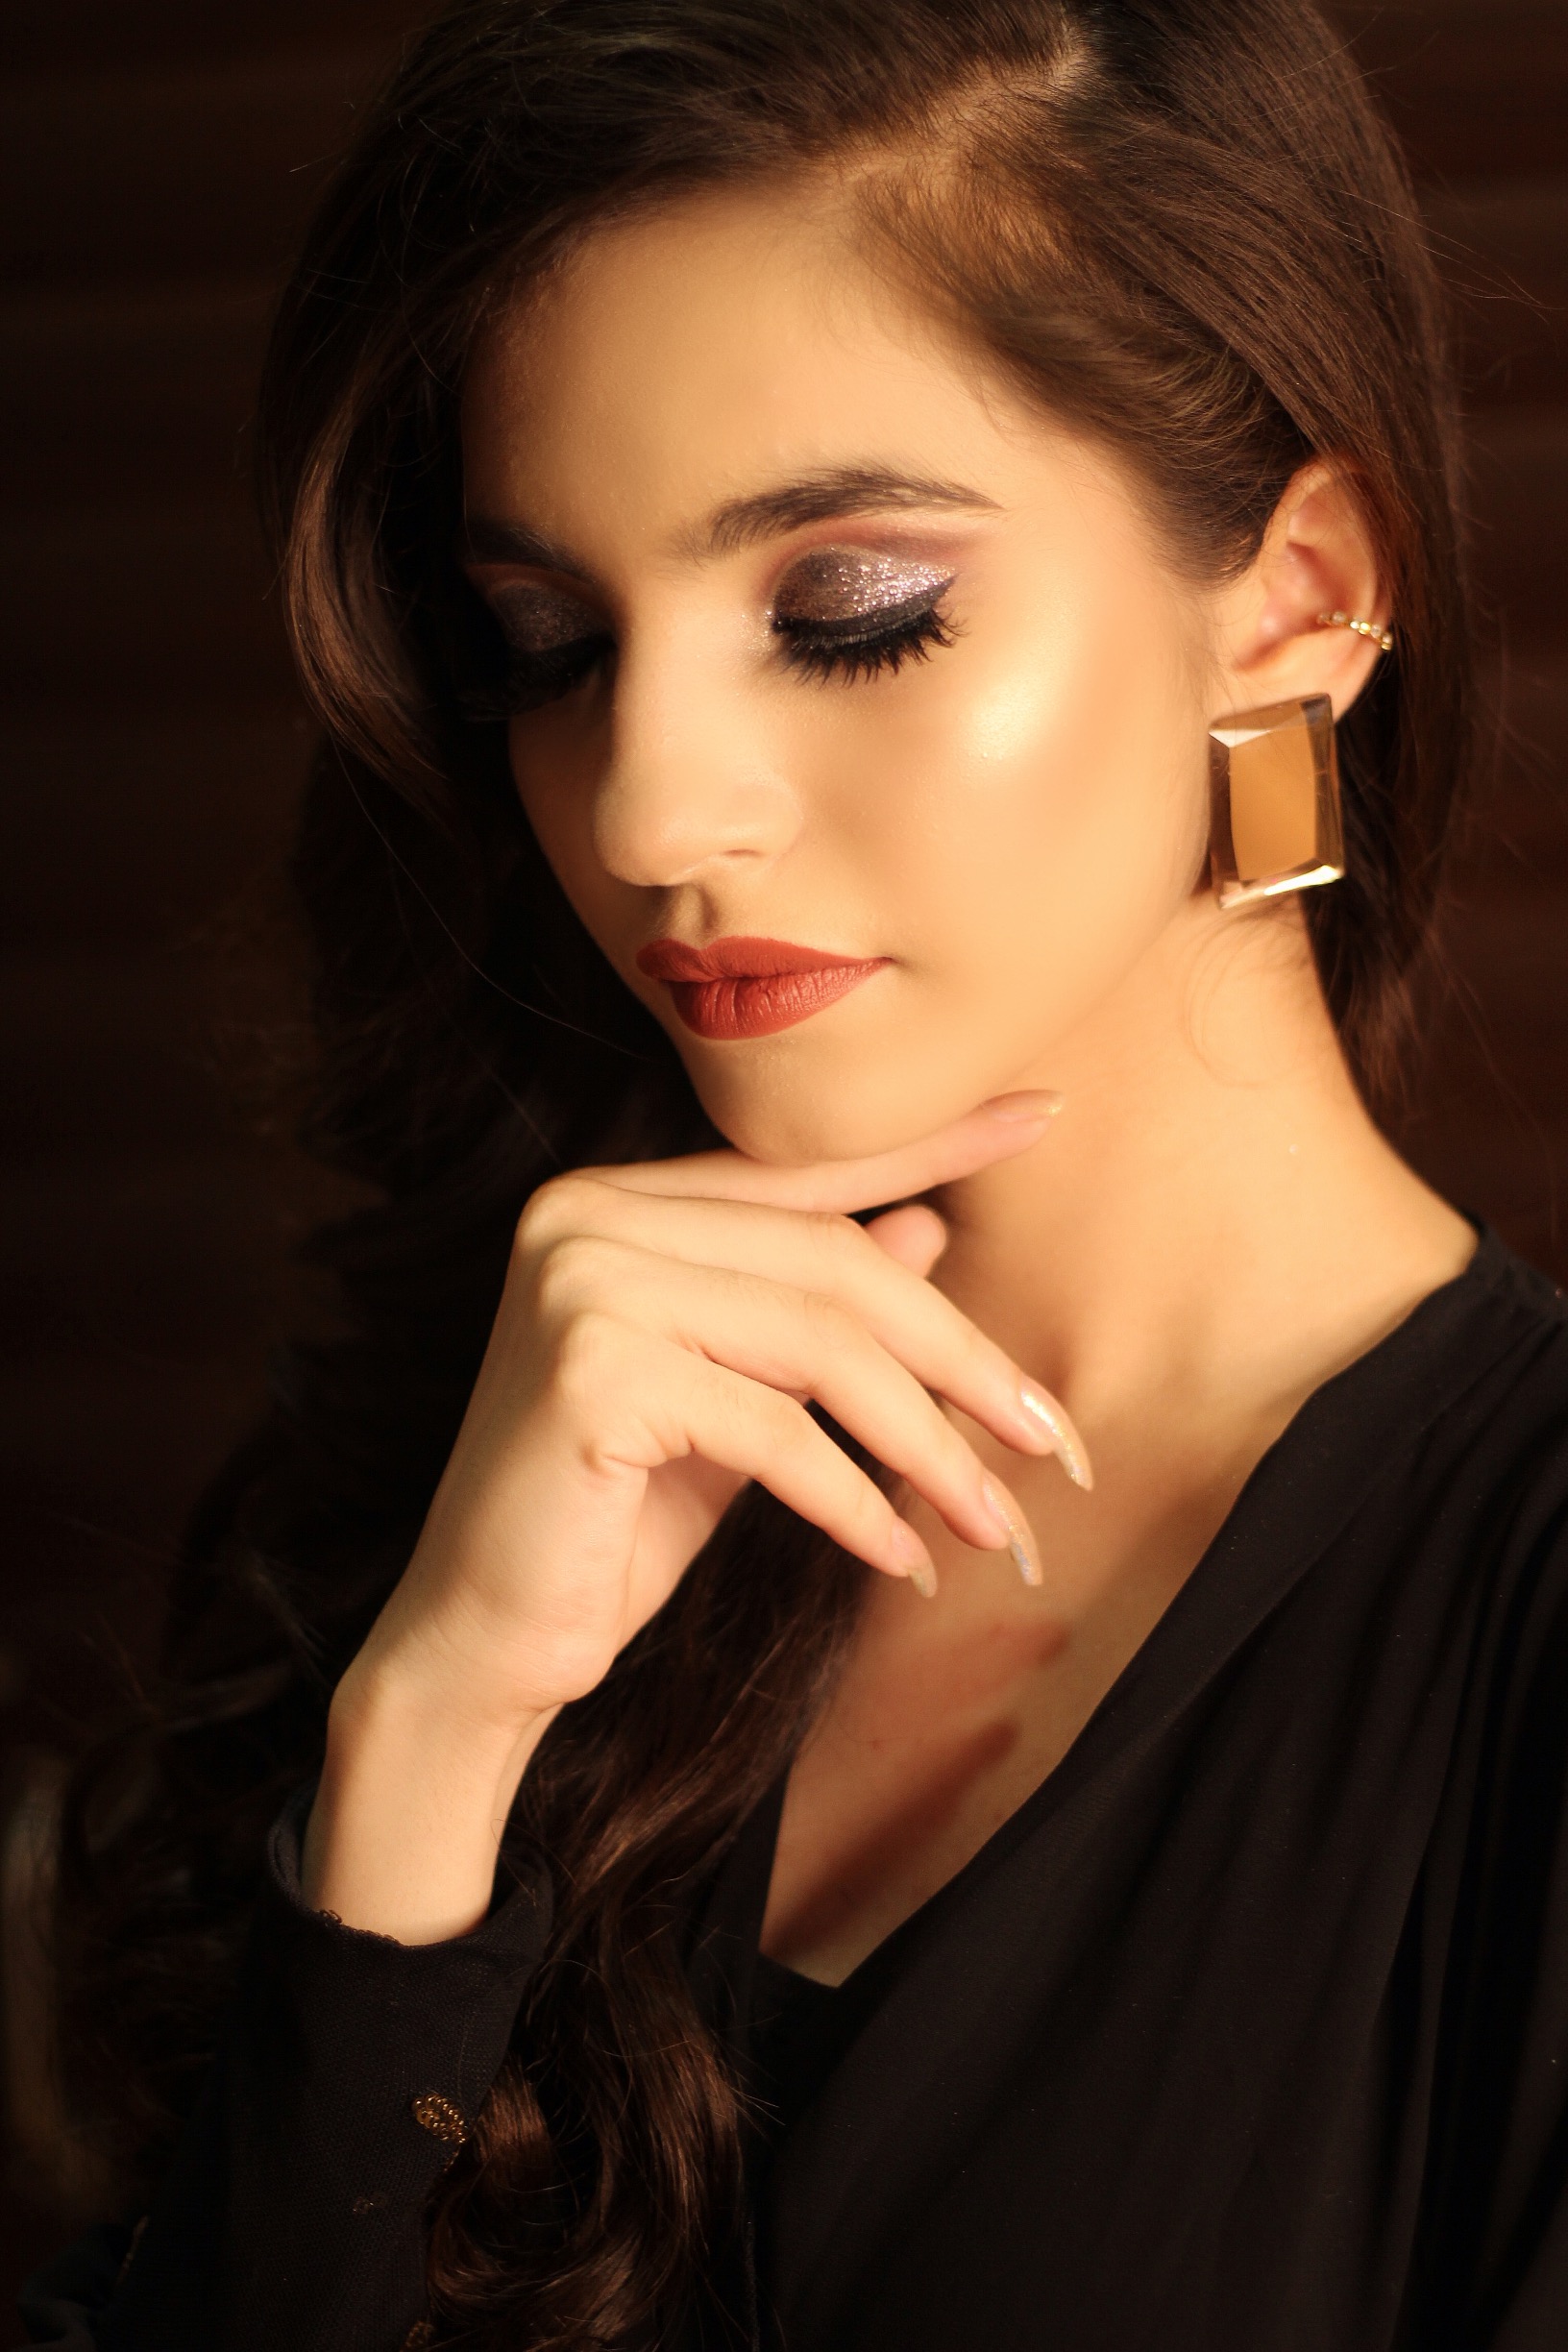 Jyoti aneja Makeup Artist Services, Review and Info - Olready